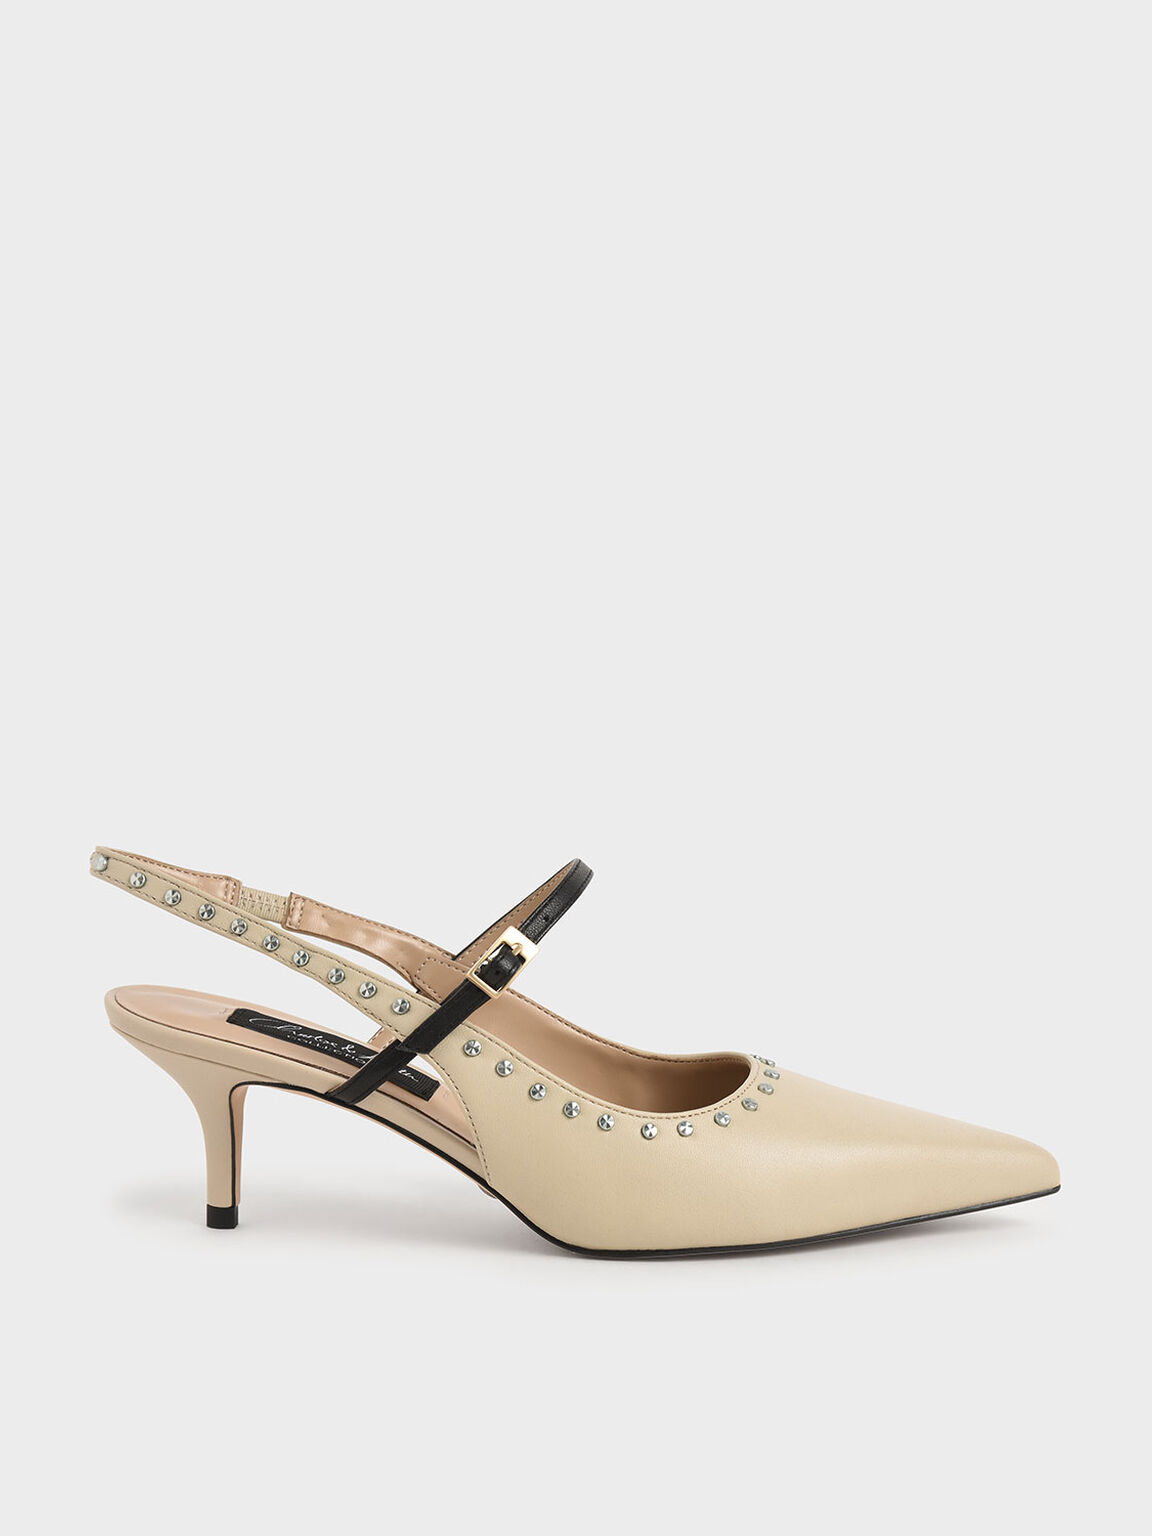 Studded Leather Slingback Pumps - CHARLES & KEITH US